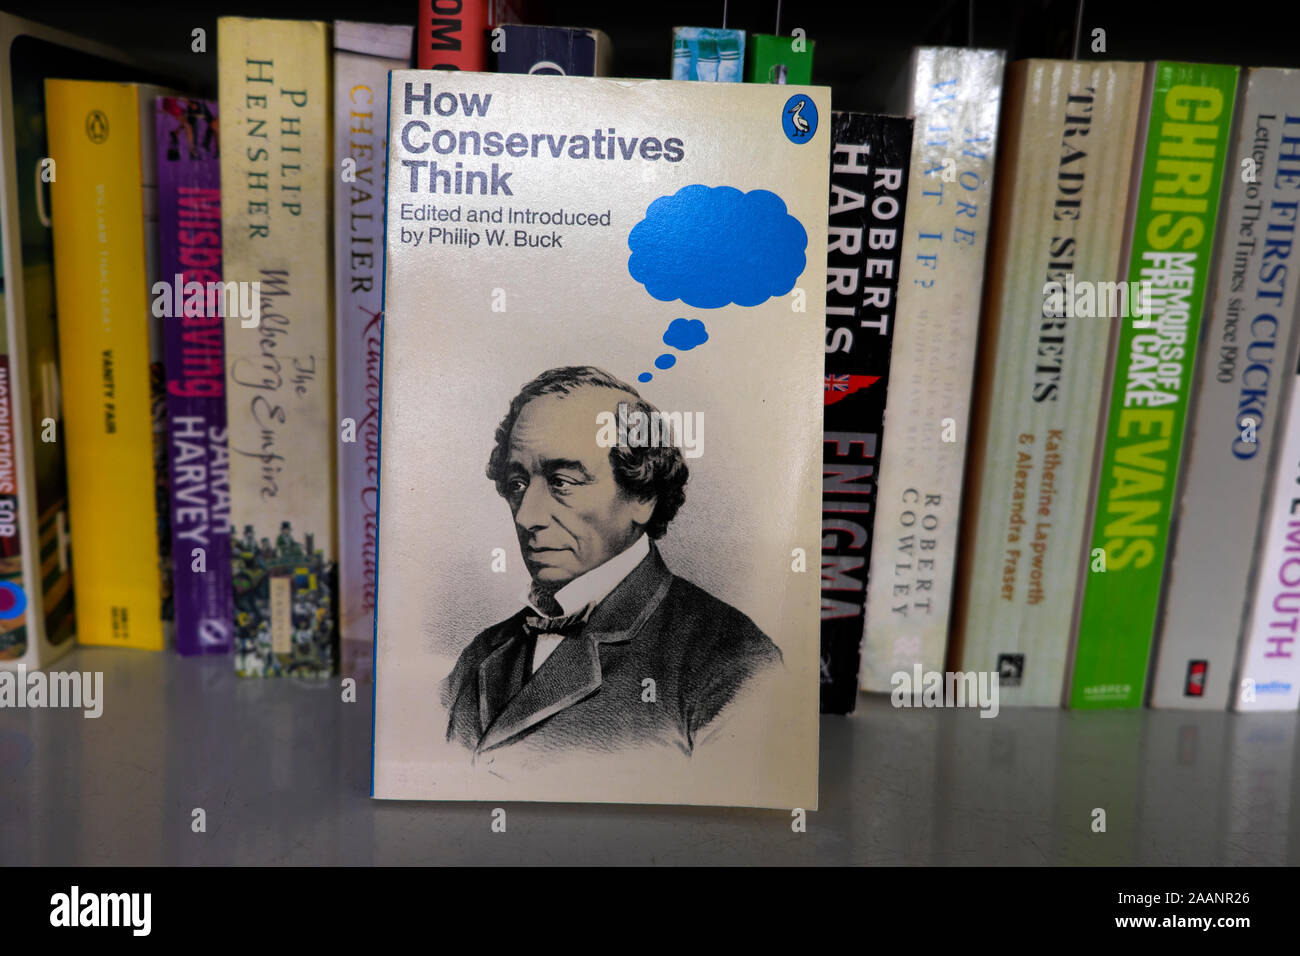 'How Conservatives Think'  book cover on a book shelf in a second hand bookshop charity shop London England UK  KATHY DEWITT Stock Photo